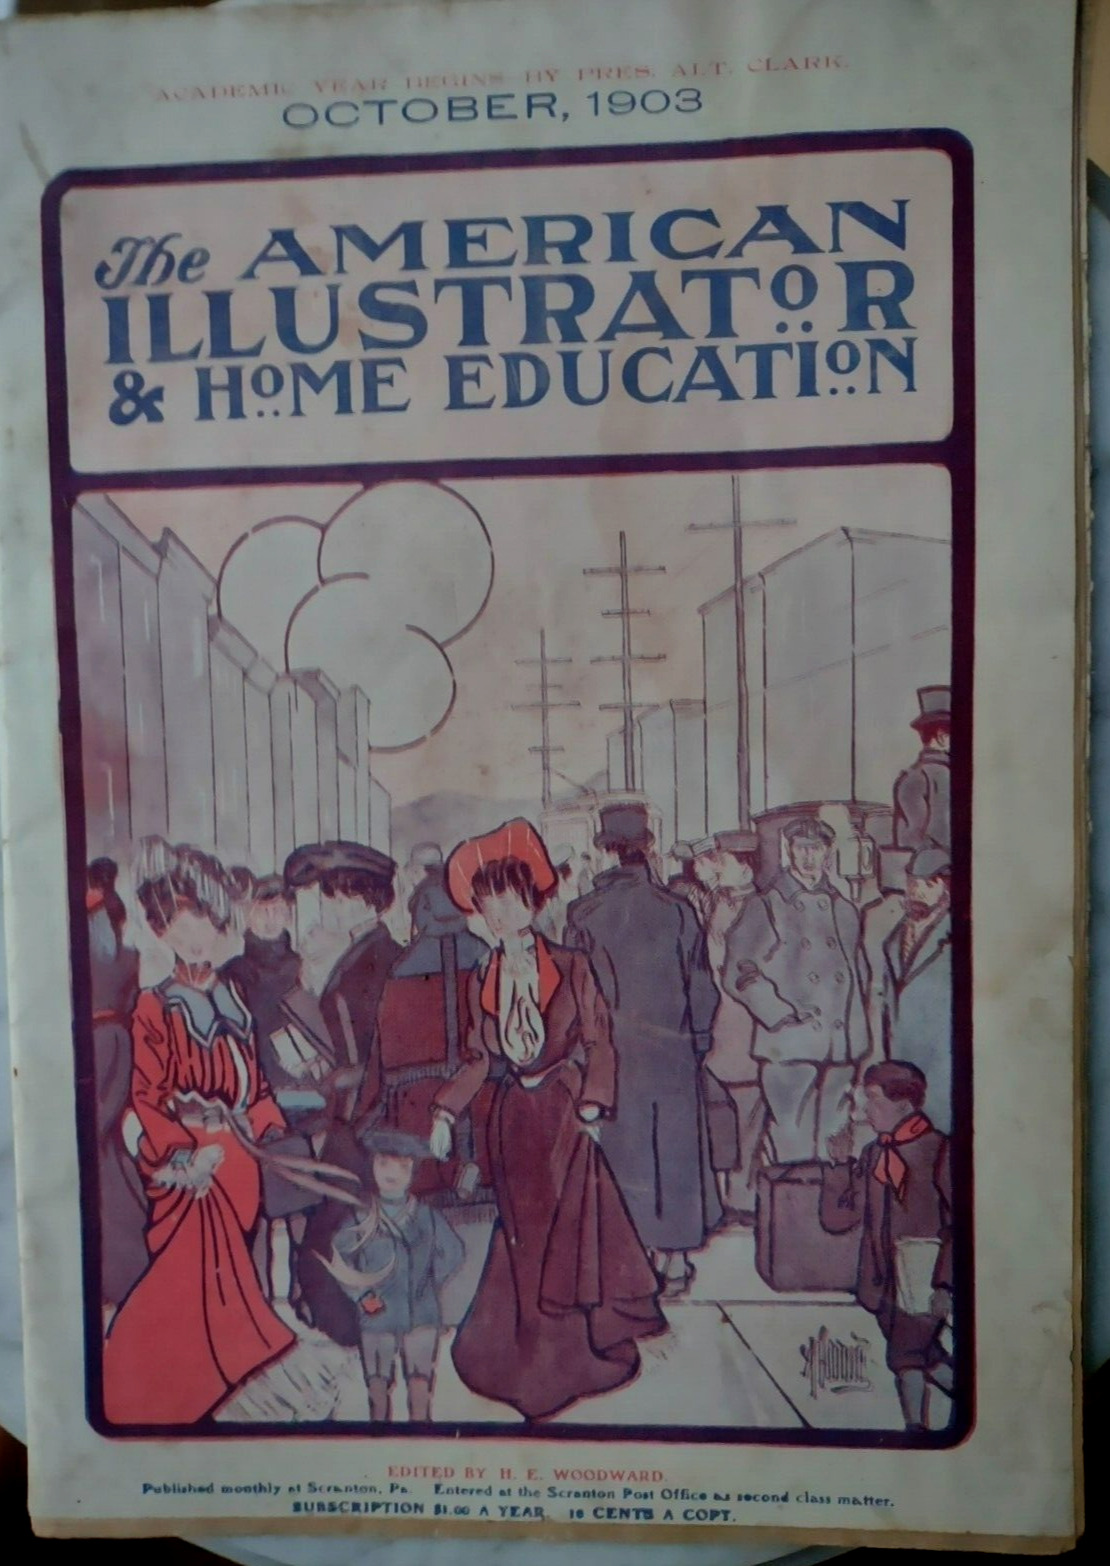 The American Illustrator & Home Education October 1903 Magazine / Phil May